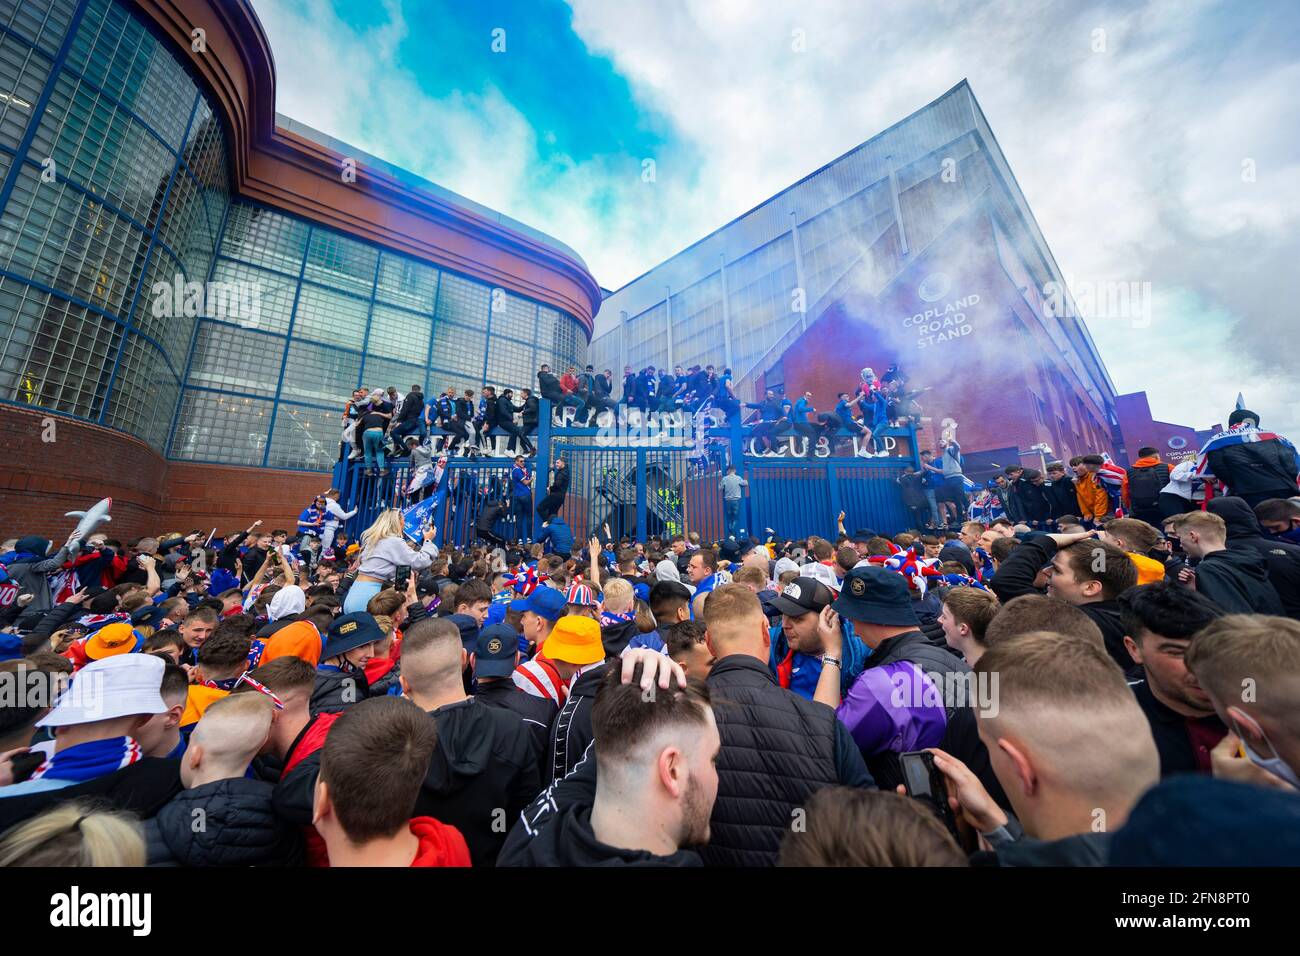 Glasgow, Scotland, UK. 15 May 2021. Thousands of supporters and fans of Rangers football club descend on Ibrox Park in Glasgow to celebrate winning the Scottish Premiership championship for the 55th time and the first time for 10 years. Smoke bombs and fireworks are being let off by fans tightly controlled by police away from the stadium entrances. Pic; Fans celebrate after full time at the gates of Ibriox. Iain Masterton/Alamy Live News Stock Photo